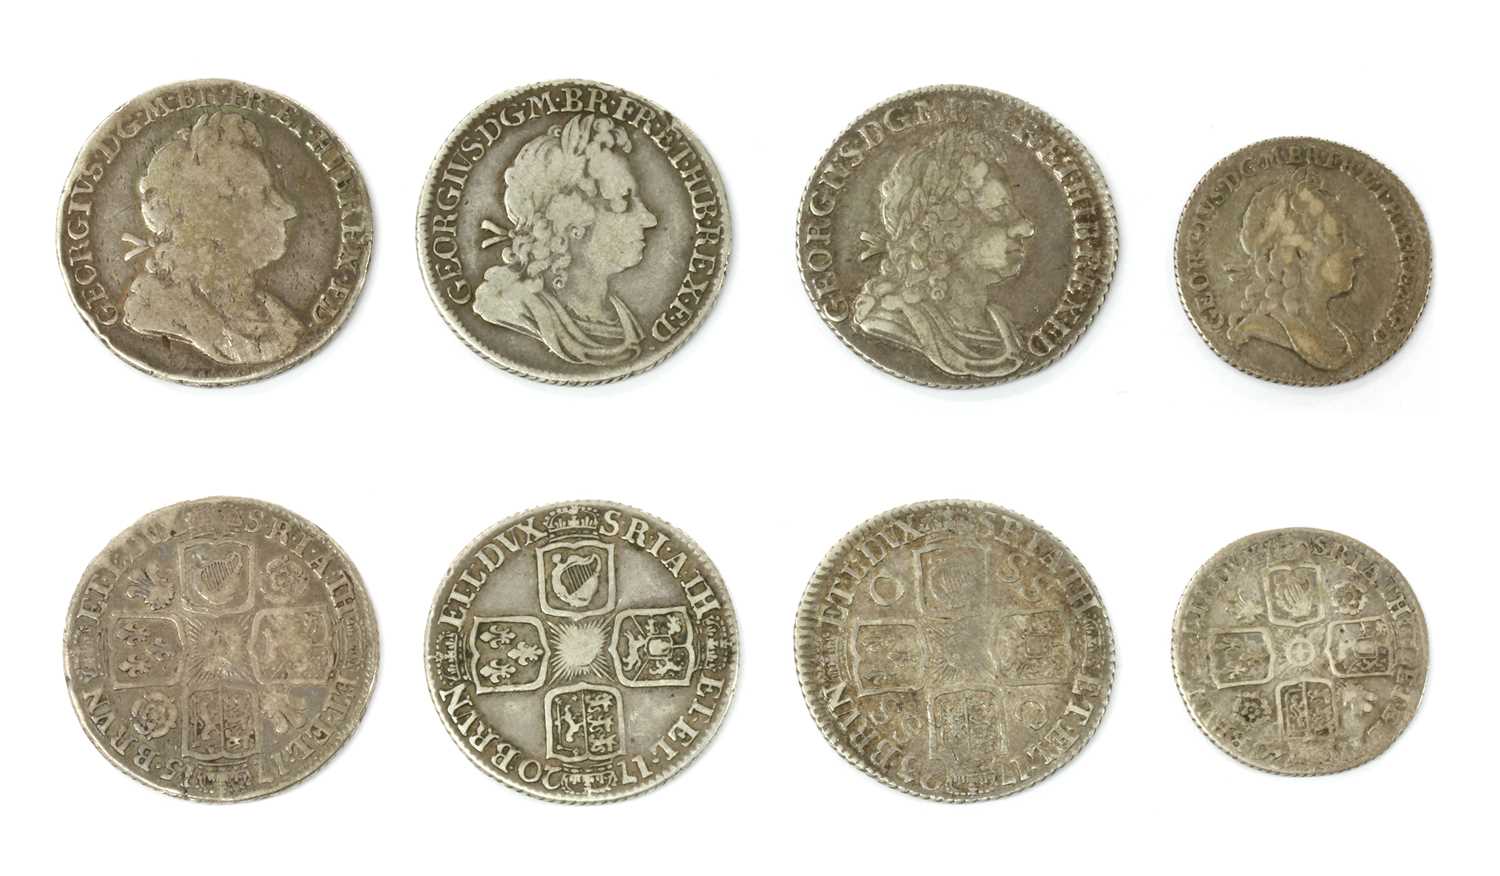 Lot 3 - Coins, Great Britain, George I (1714-1727)